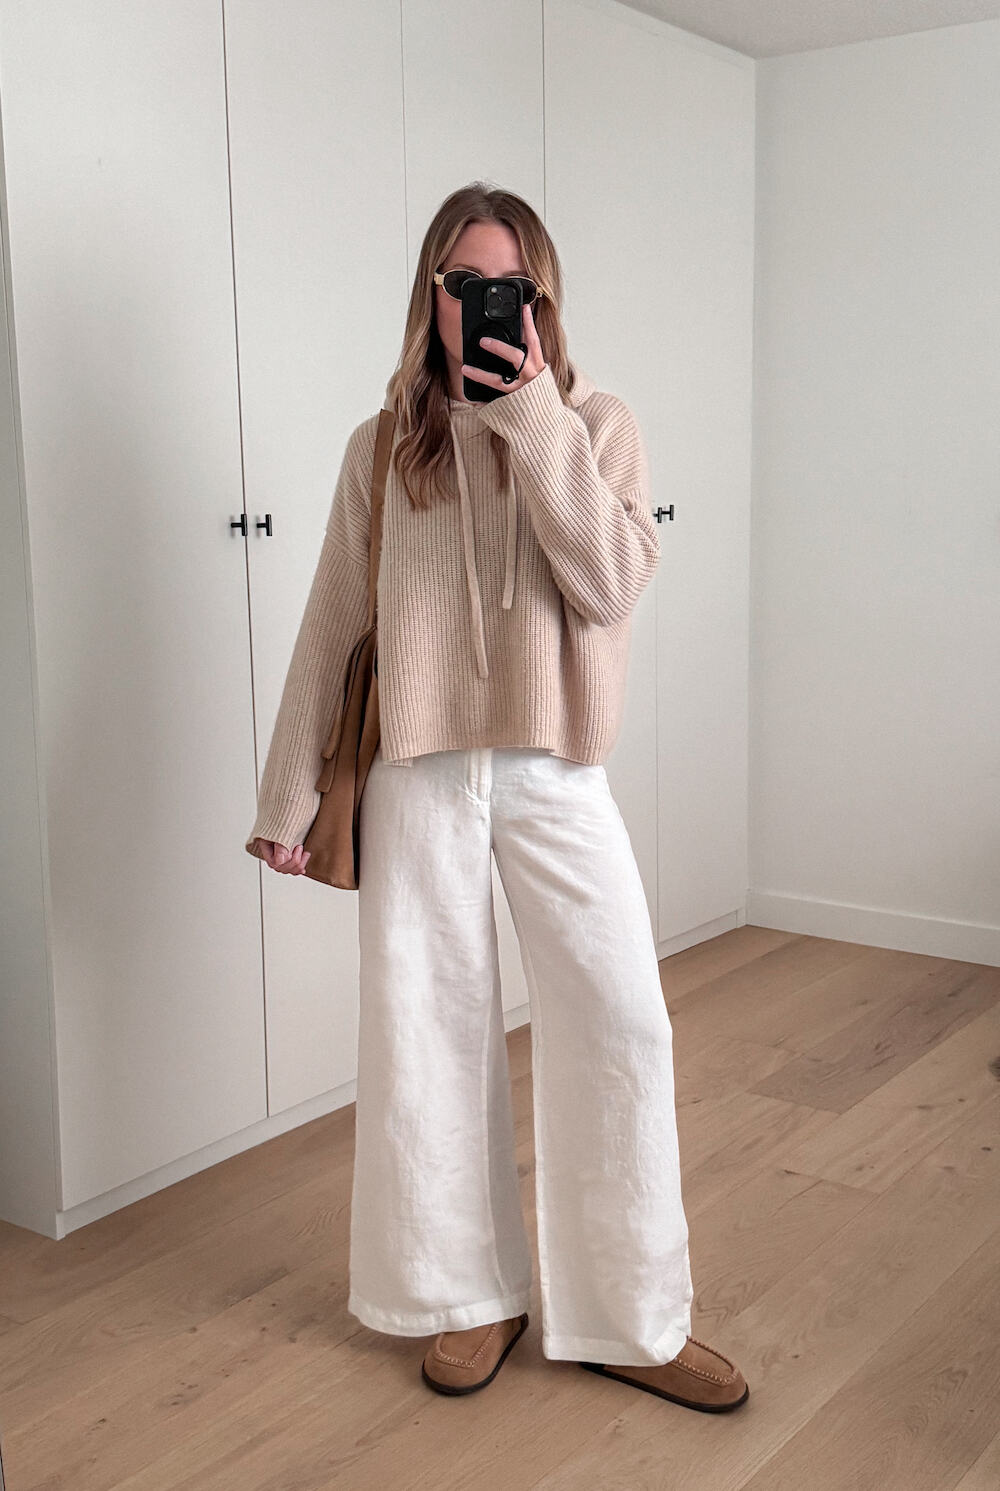 Christal wearing white wide leg jeans and a beige oversized sweater.